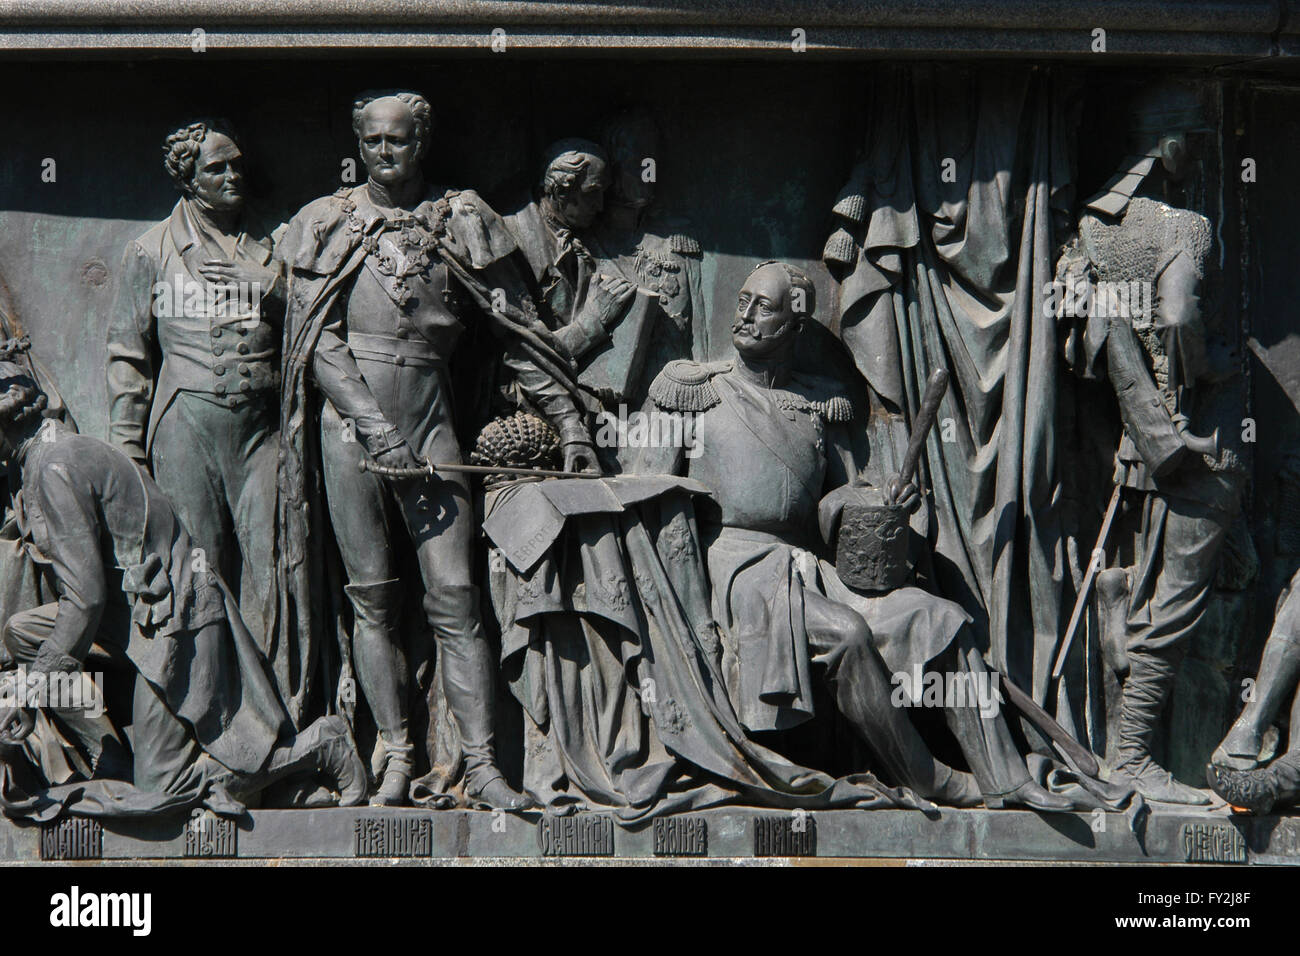 Emperor Alexander I and Emperor Nicholas I of Russia depicted in the bas relief dedicated to Russian statesmen by Russian sculptor Nikolai Laveretsky. Detail of the Monument to the Millennium of Russia (1862) designed by Mikhail Mikeshin in Veliky Novgorod, Russia. Persons from left to right: Viktor Kochubey, Emperor Alexander I of Russia, Mikhail Speransky, Mikhail Vorontsov and Emperor Nicholas I of Russia (sitting). Grand Prince Sviatoslav I of Kiev depicted in the right in the bas relief dedicated to Russian military men and heroes by sculptors Matvey Chizhov and Alexander Lubimov. Stock Photo